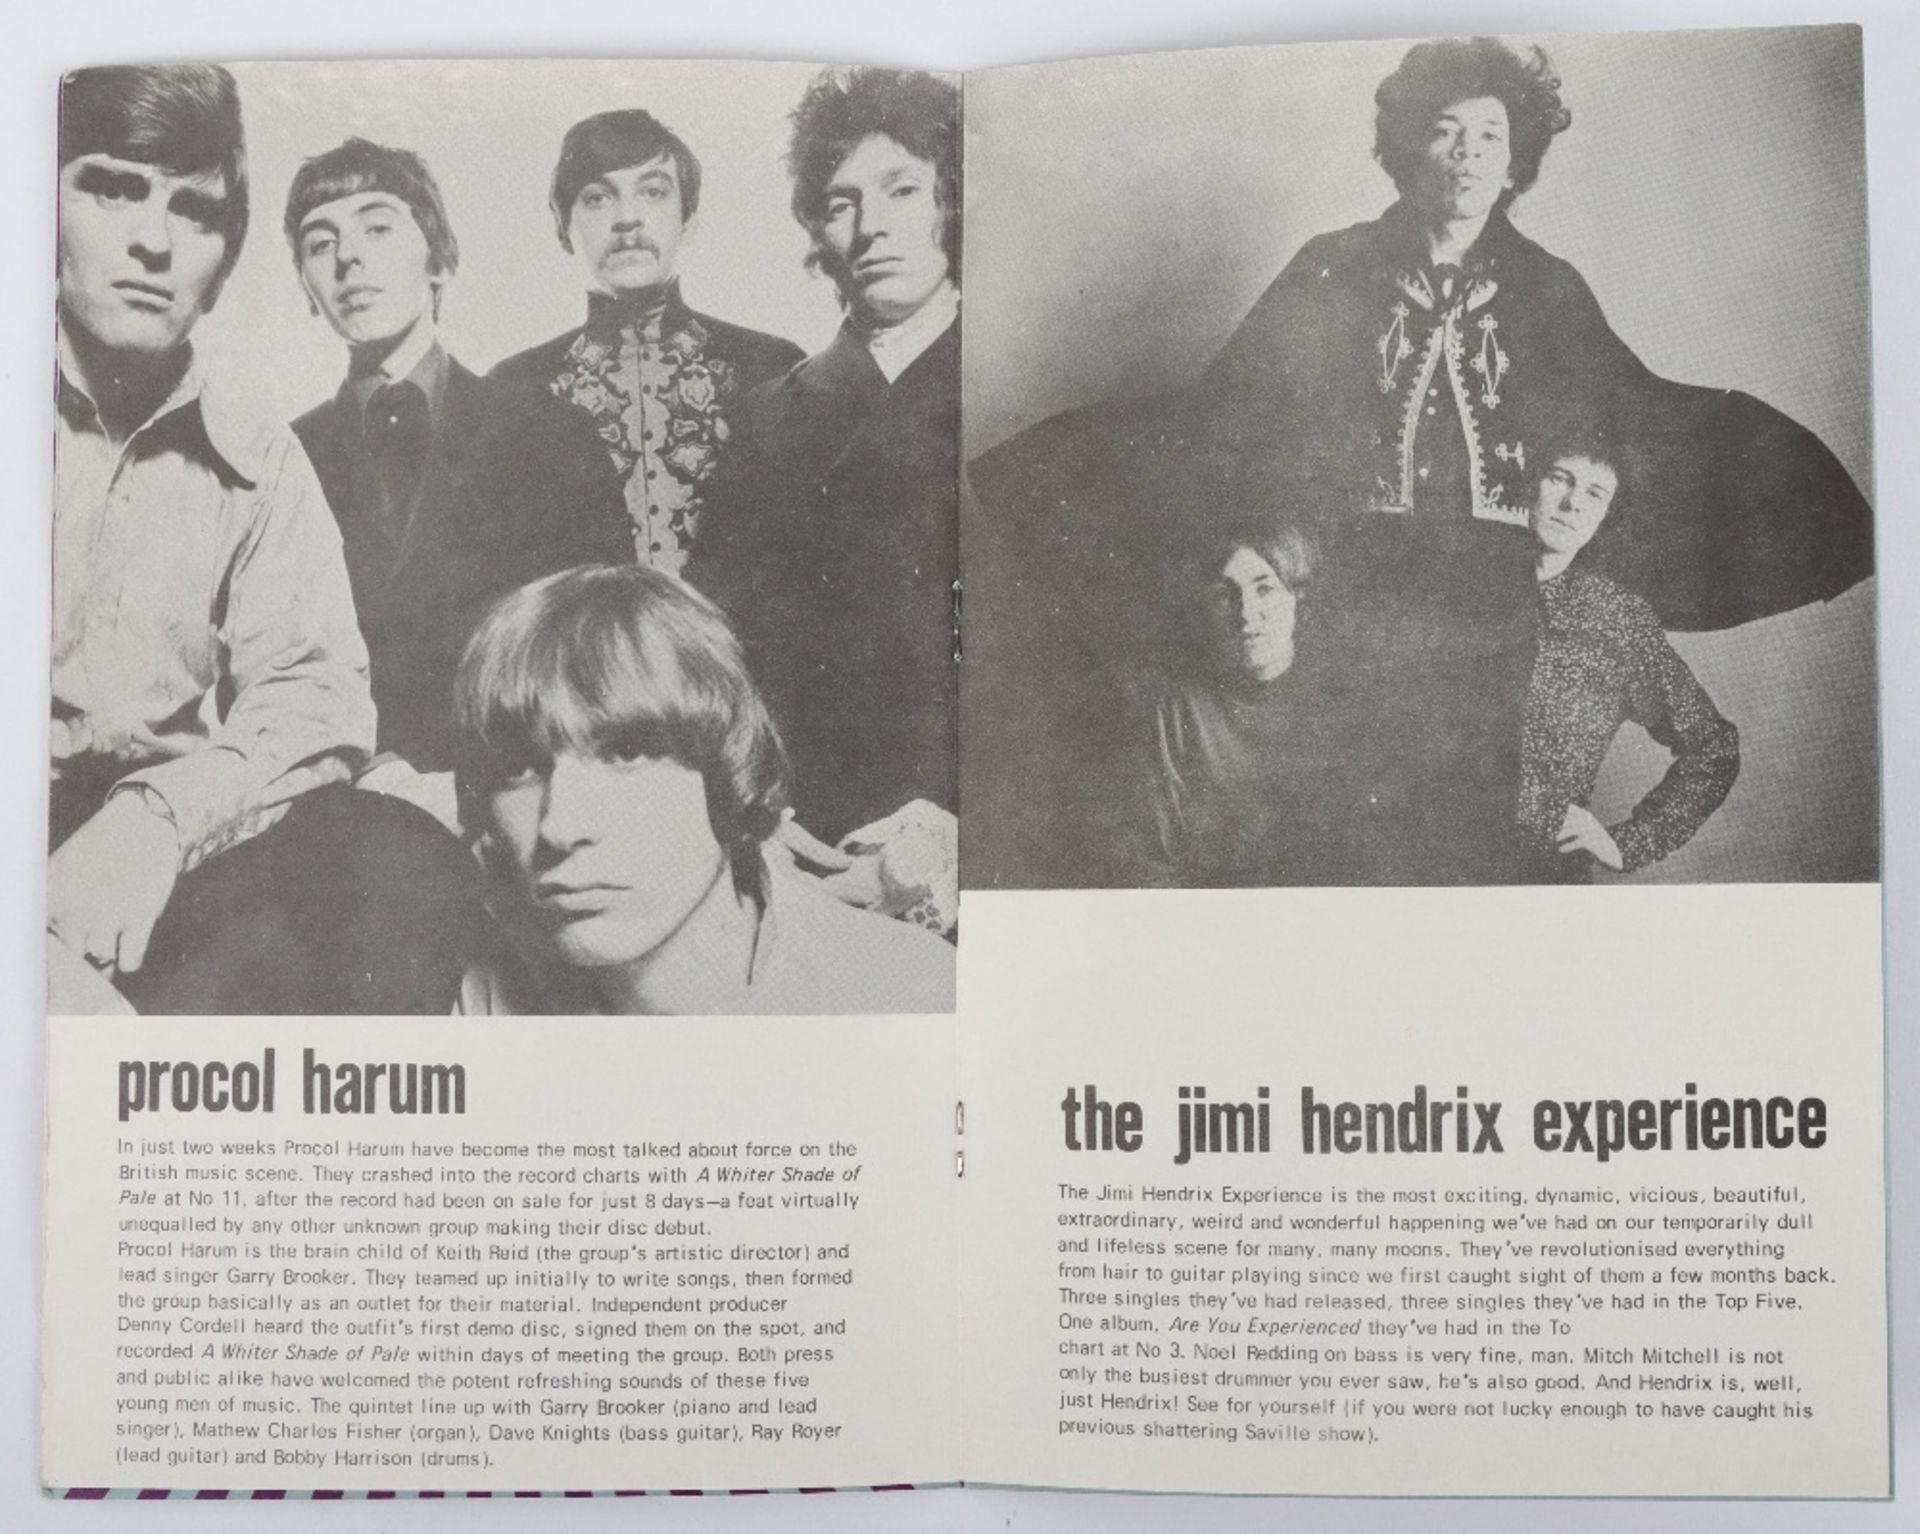 Programme for Sunday at the Saville featuring The Jimi Hendrix Experience Sunday 4th June 1967 - Image 3 of 5